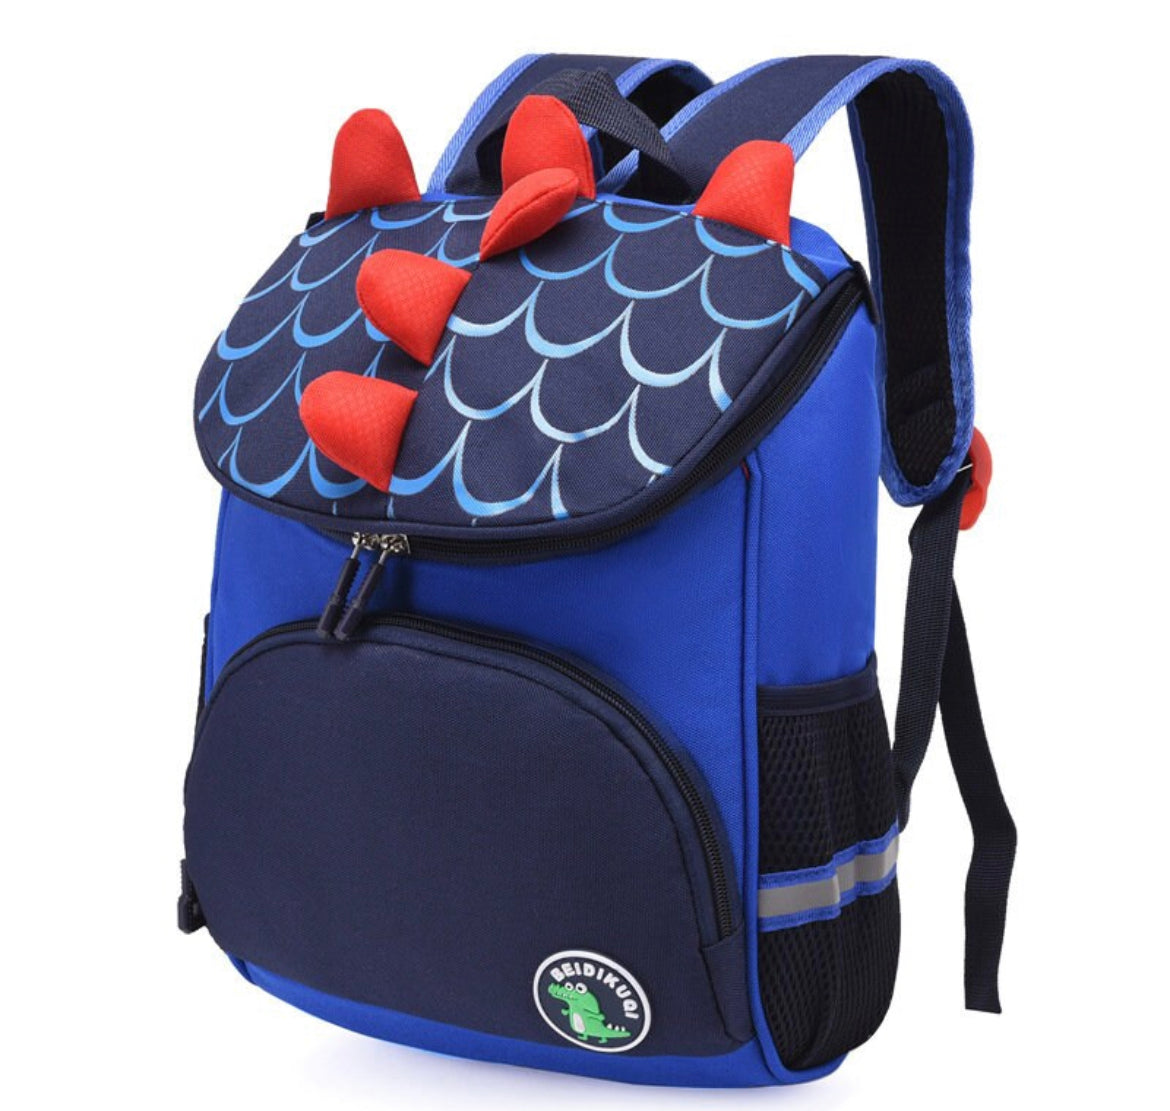 Personalized Embroidered Dinosaur Backpack